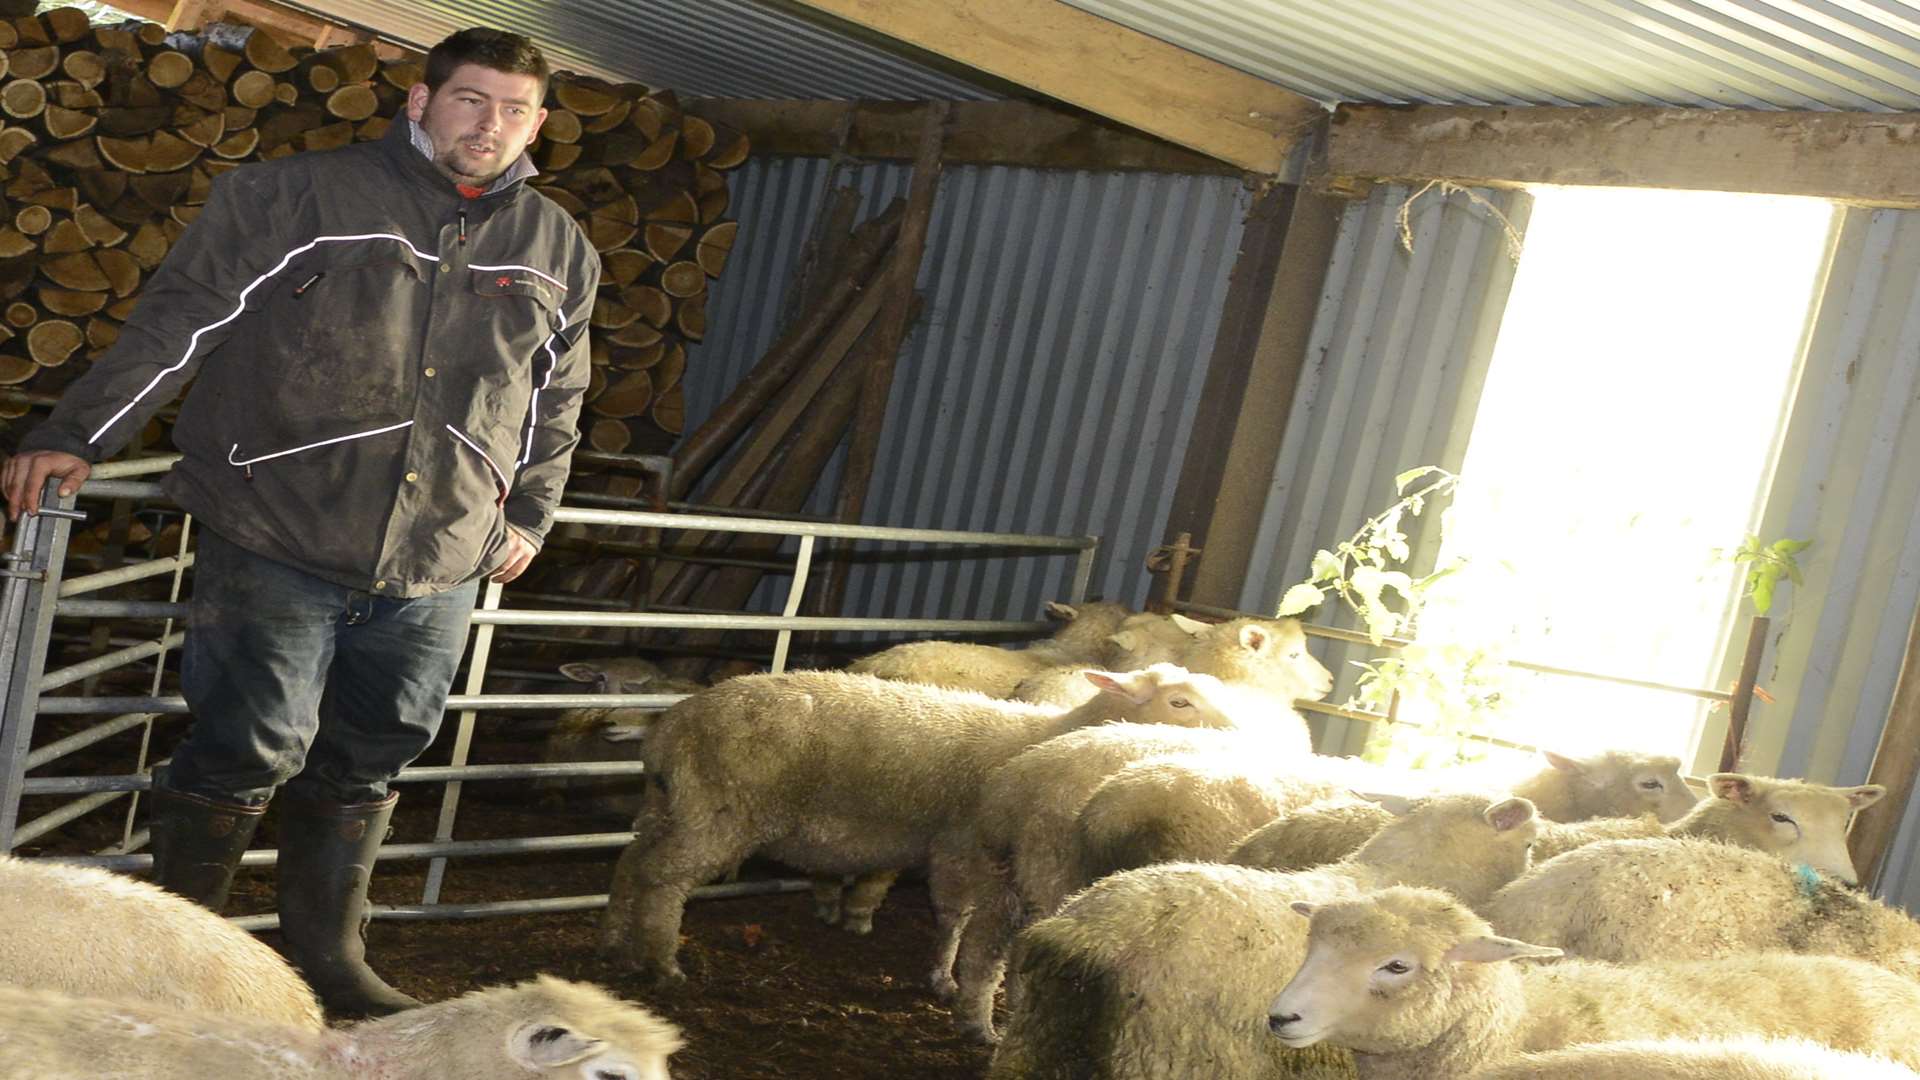 Farmer Alex Pynn said the sheep that survived were shocked and wounded